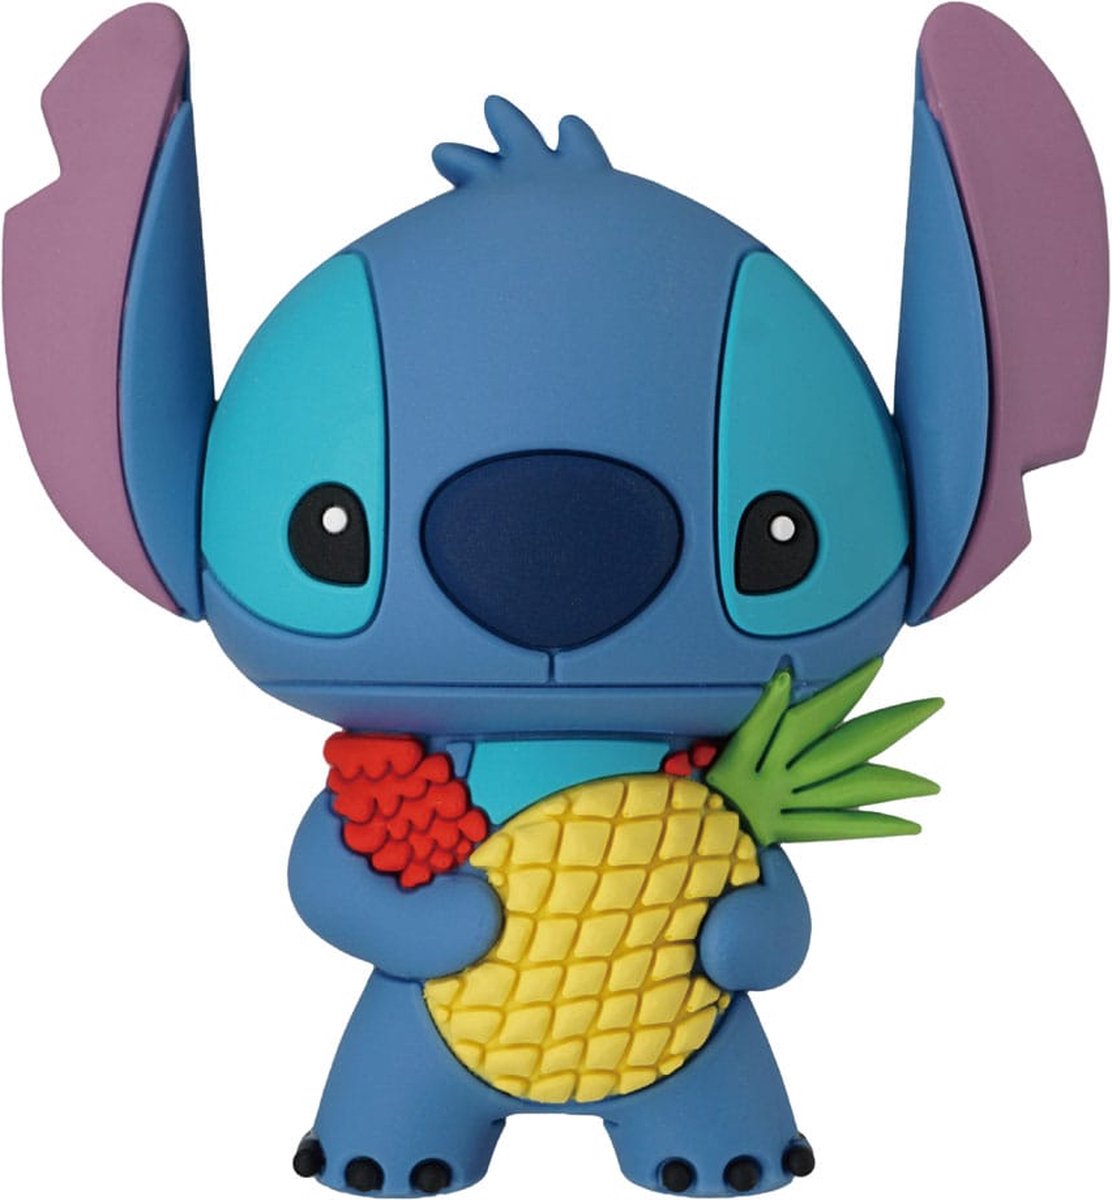 DISNEY - Stitch with pineapple - 3D foam collectible magnet / Magneet